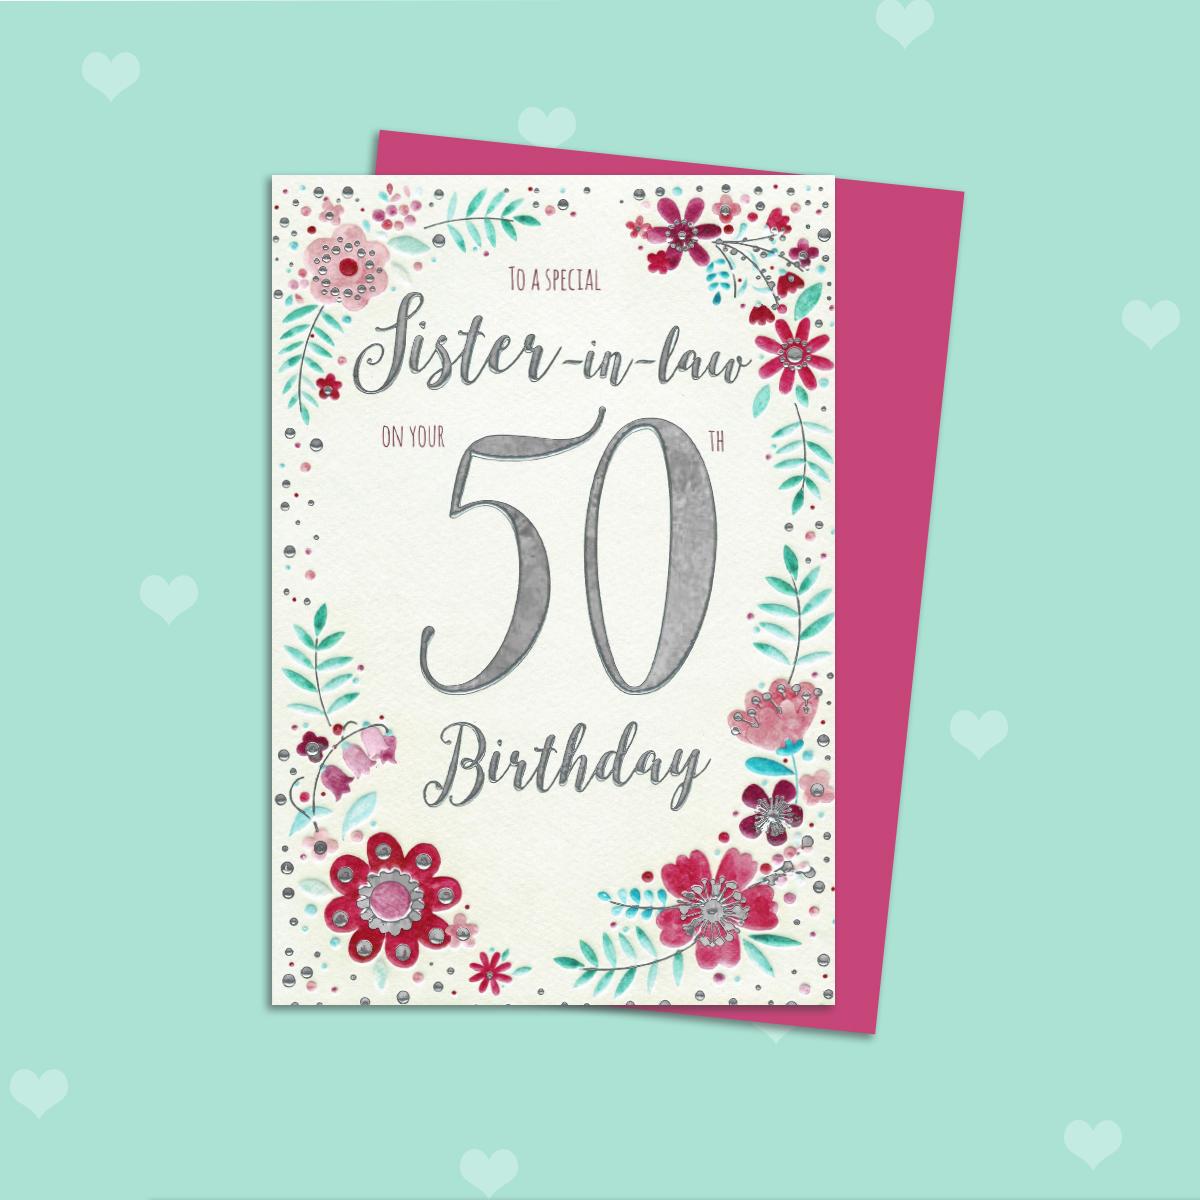 Sister In Law Age 50 Birthday Card Alongside Its Magenta Envelope